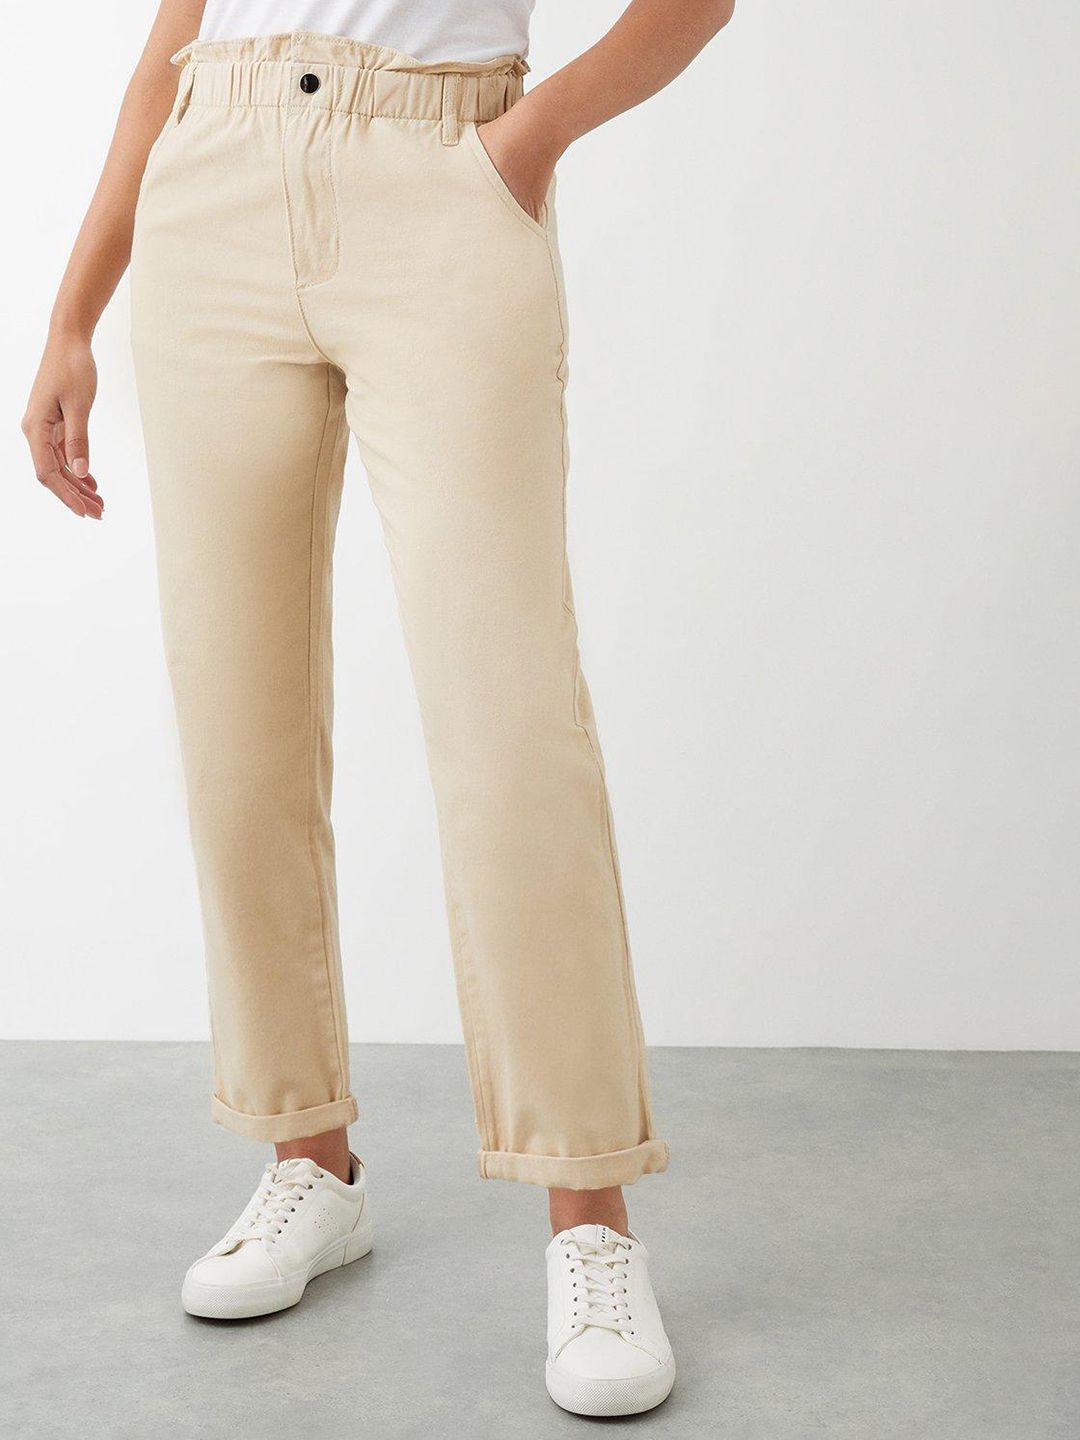 DOROTHY PERKINS Women Straight Fit Paperbag Trousers Price in India